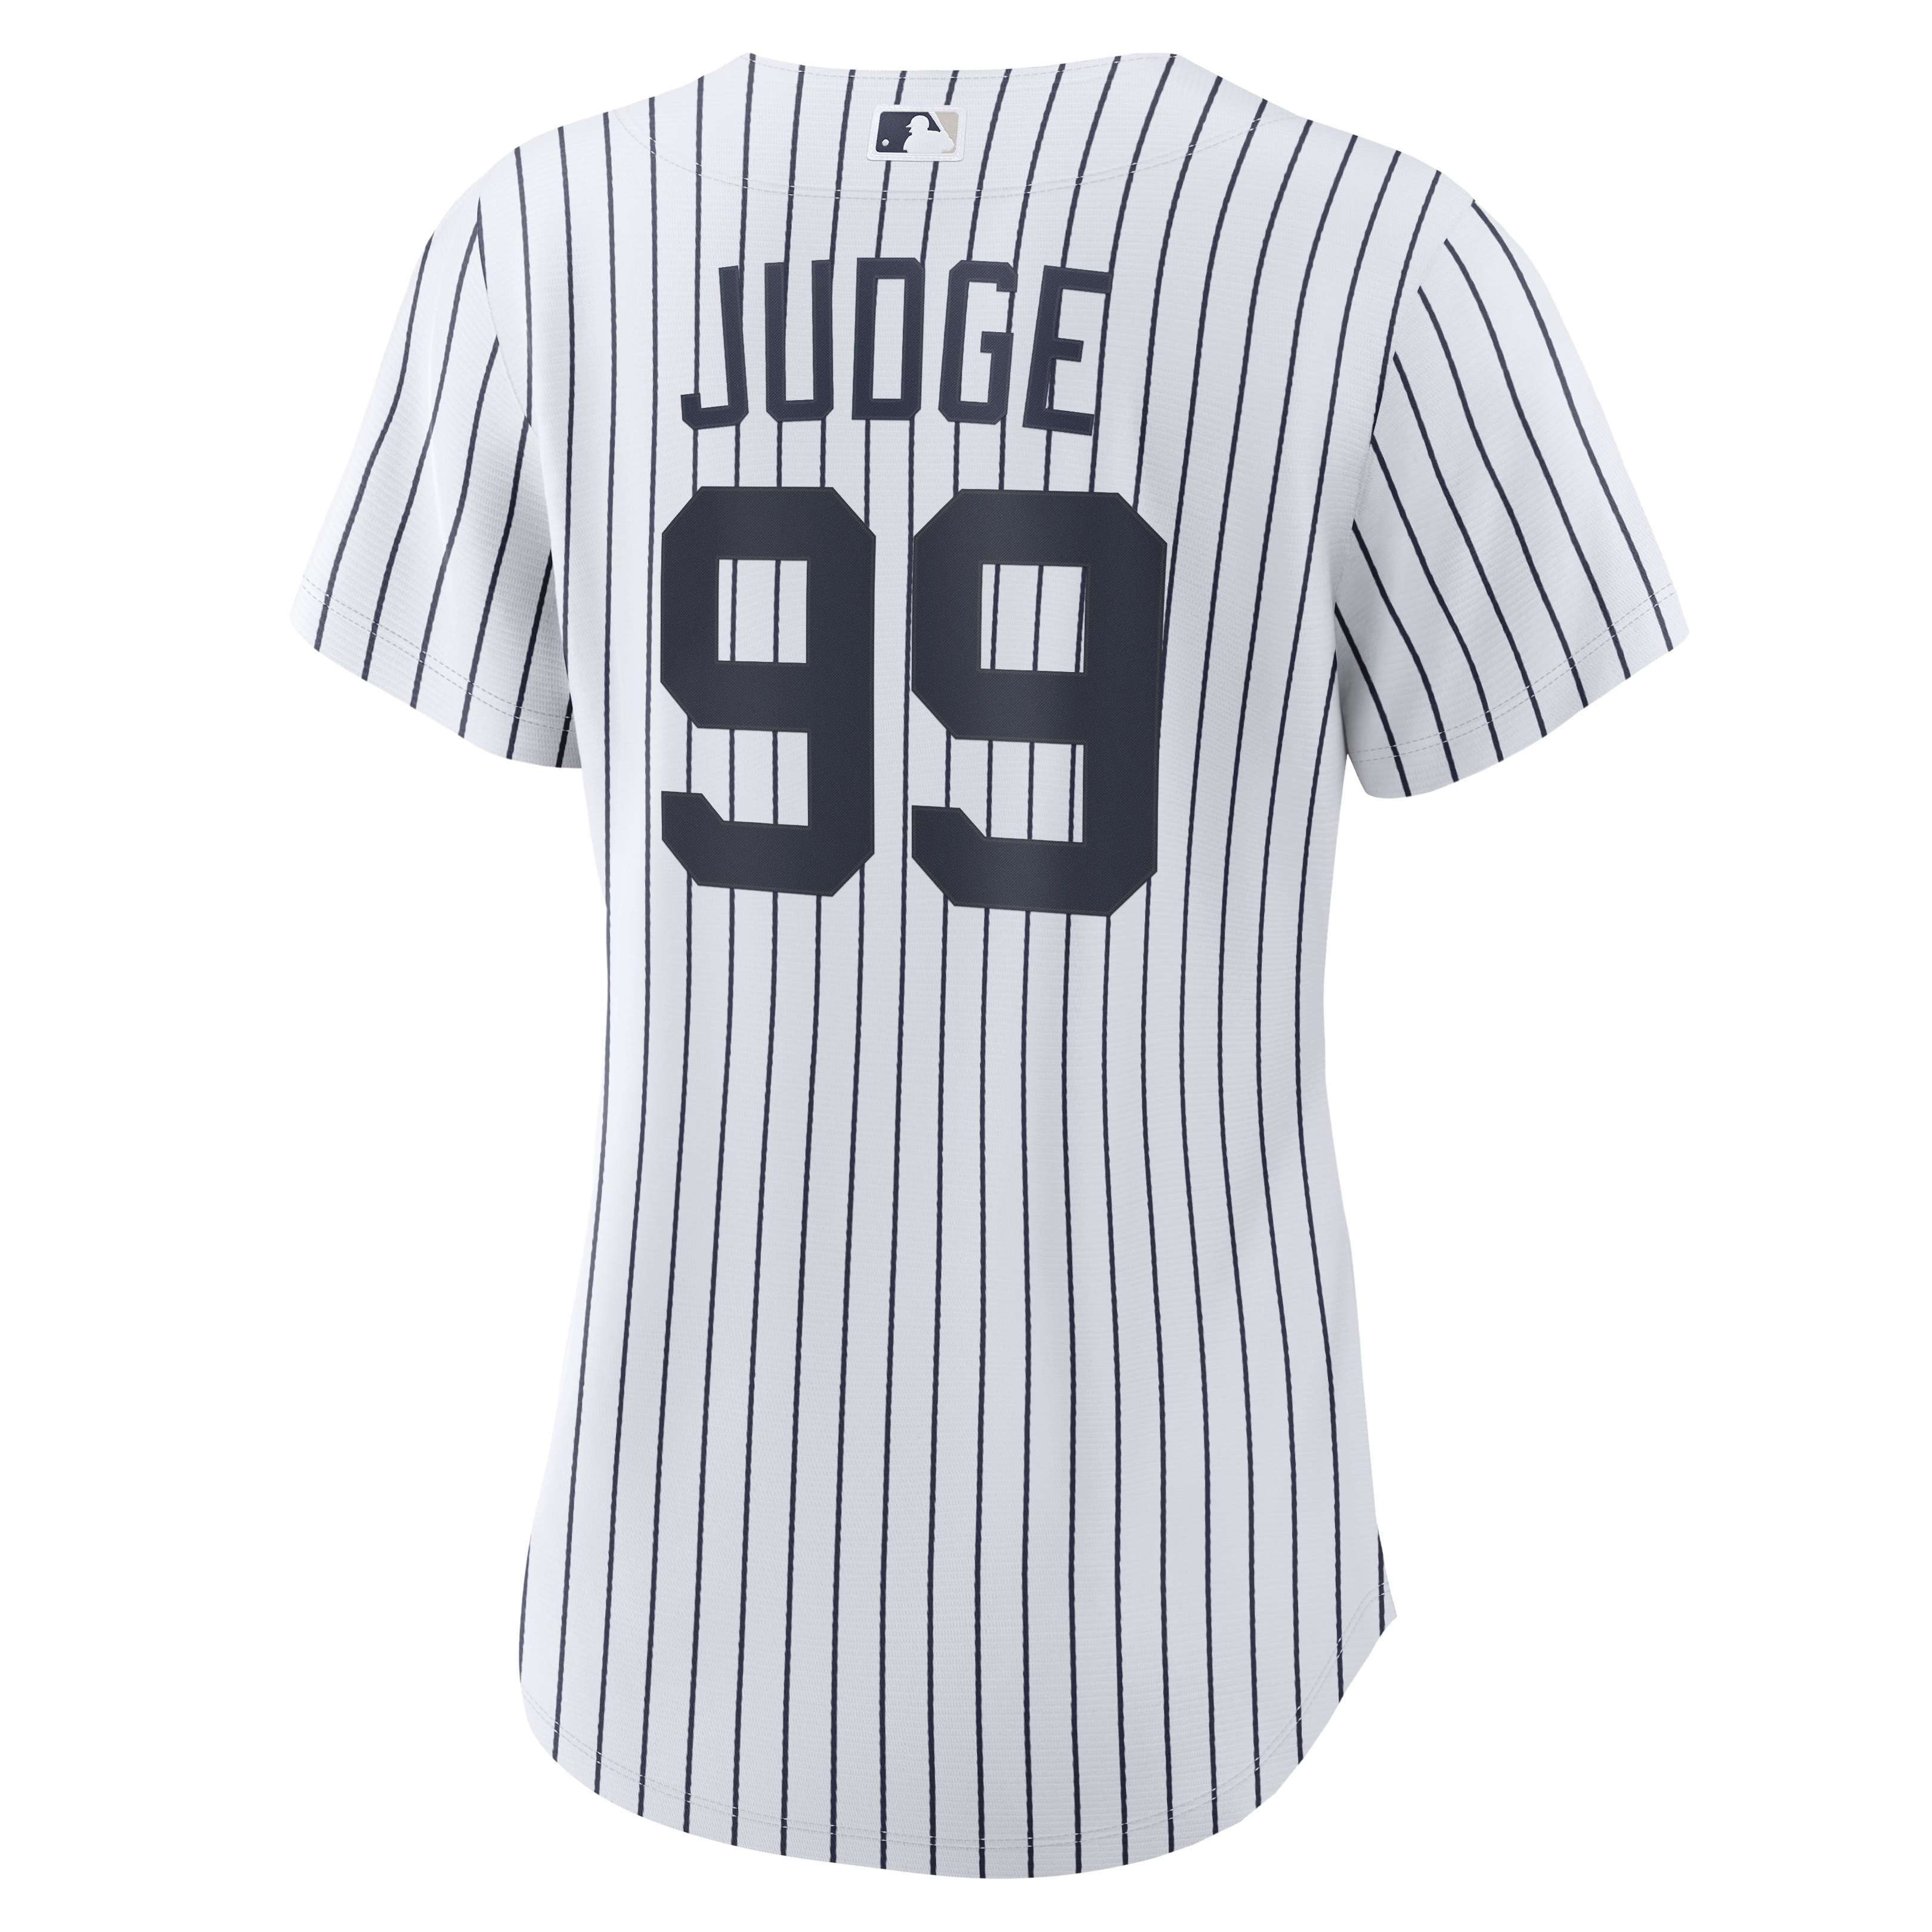 All Rise 99-All Rise For The Judge Ny Yankee Baseball Women Zipper Sexy  Printed Vintage T Shirts Tops Full Print T-Shirt Aaron - AliExpress